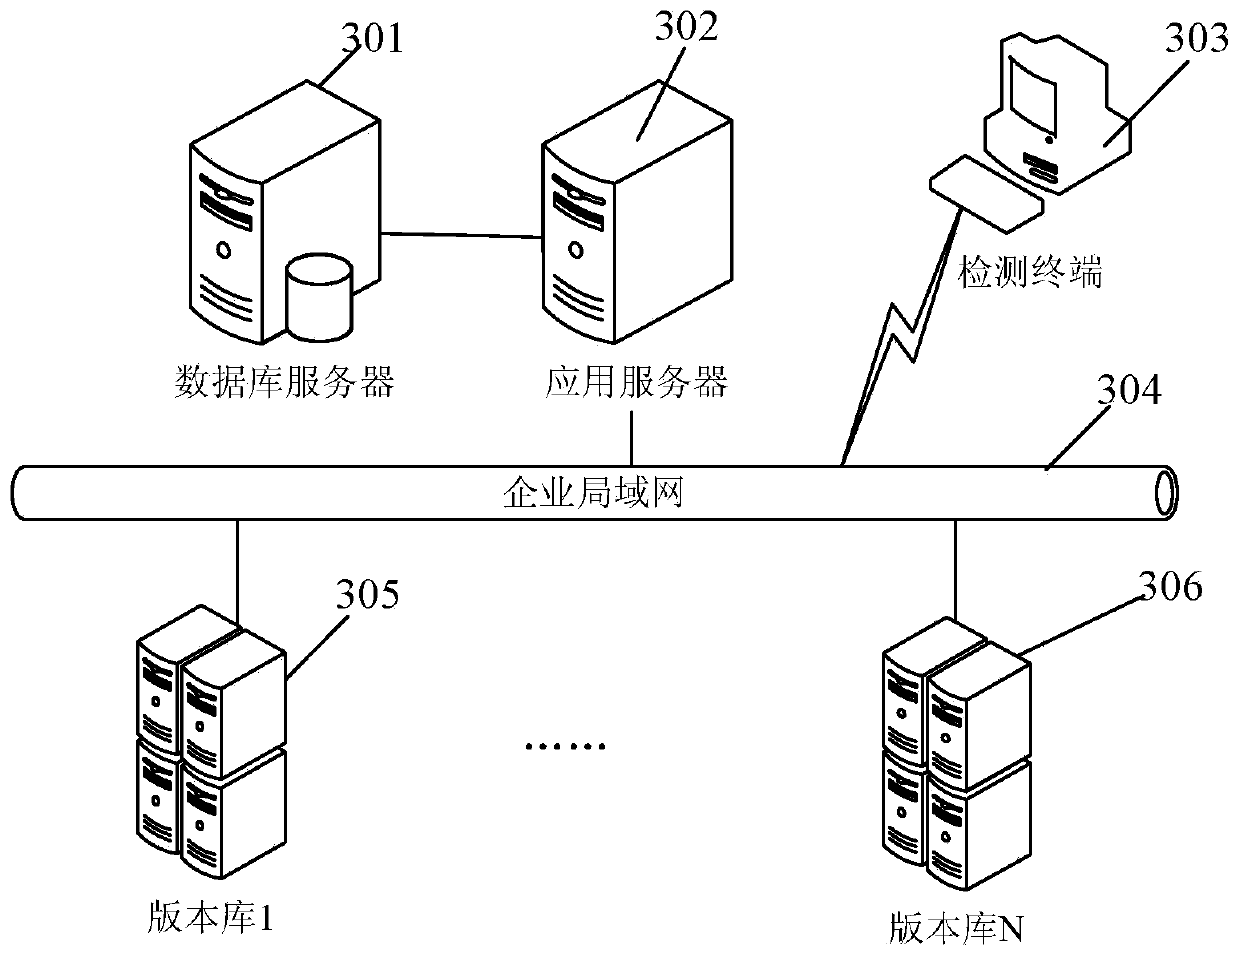 Method and device for detecting application program version